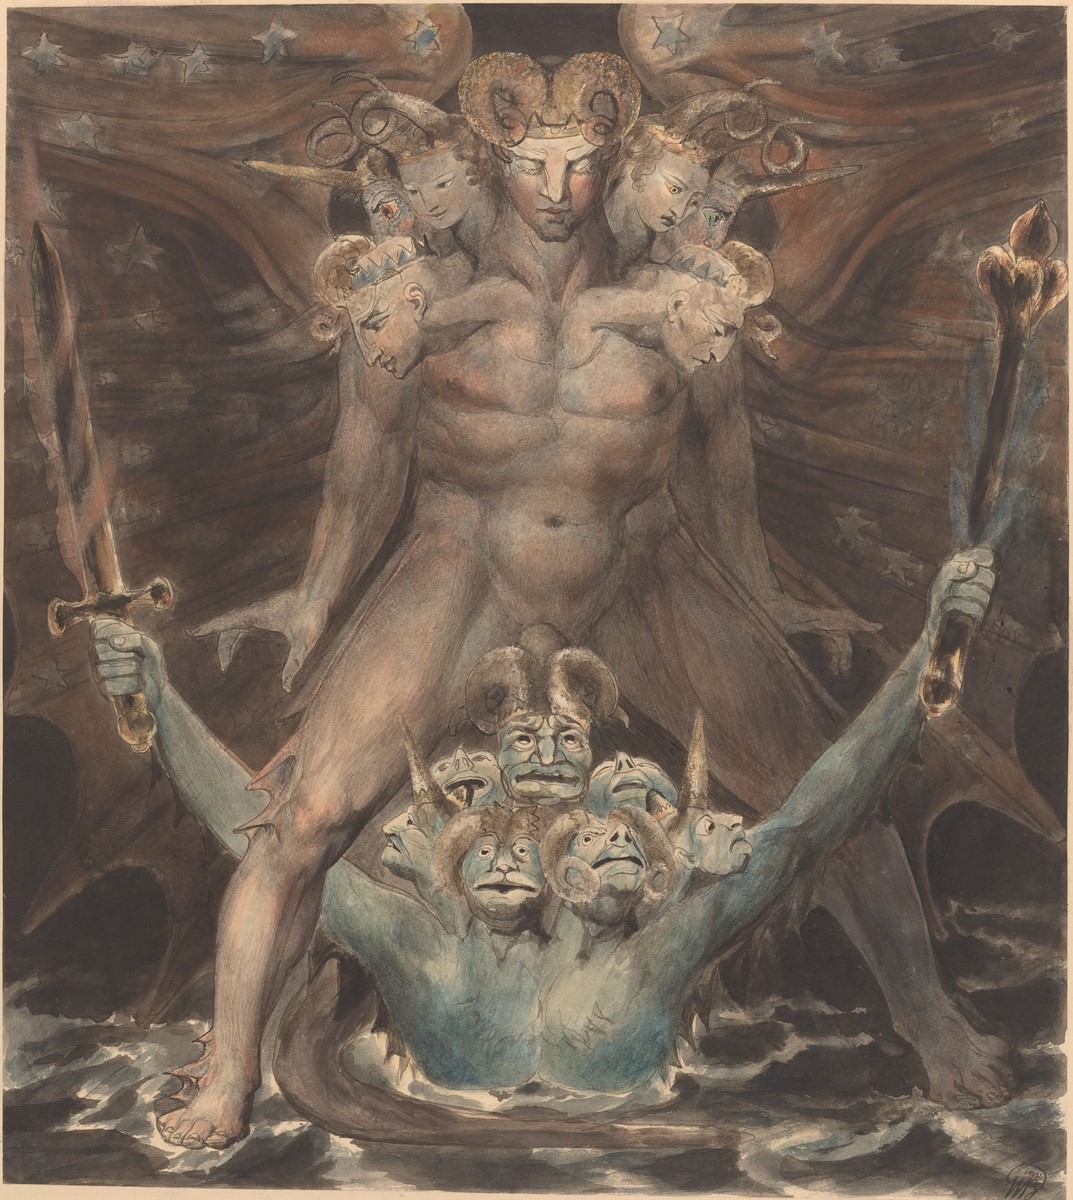 The Great Red Dragon and the Beast from the Sea, 1805. William Blake. National Gallery of Art, Washington. Coleção Rosenwald.